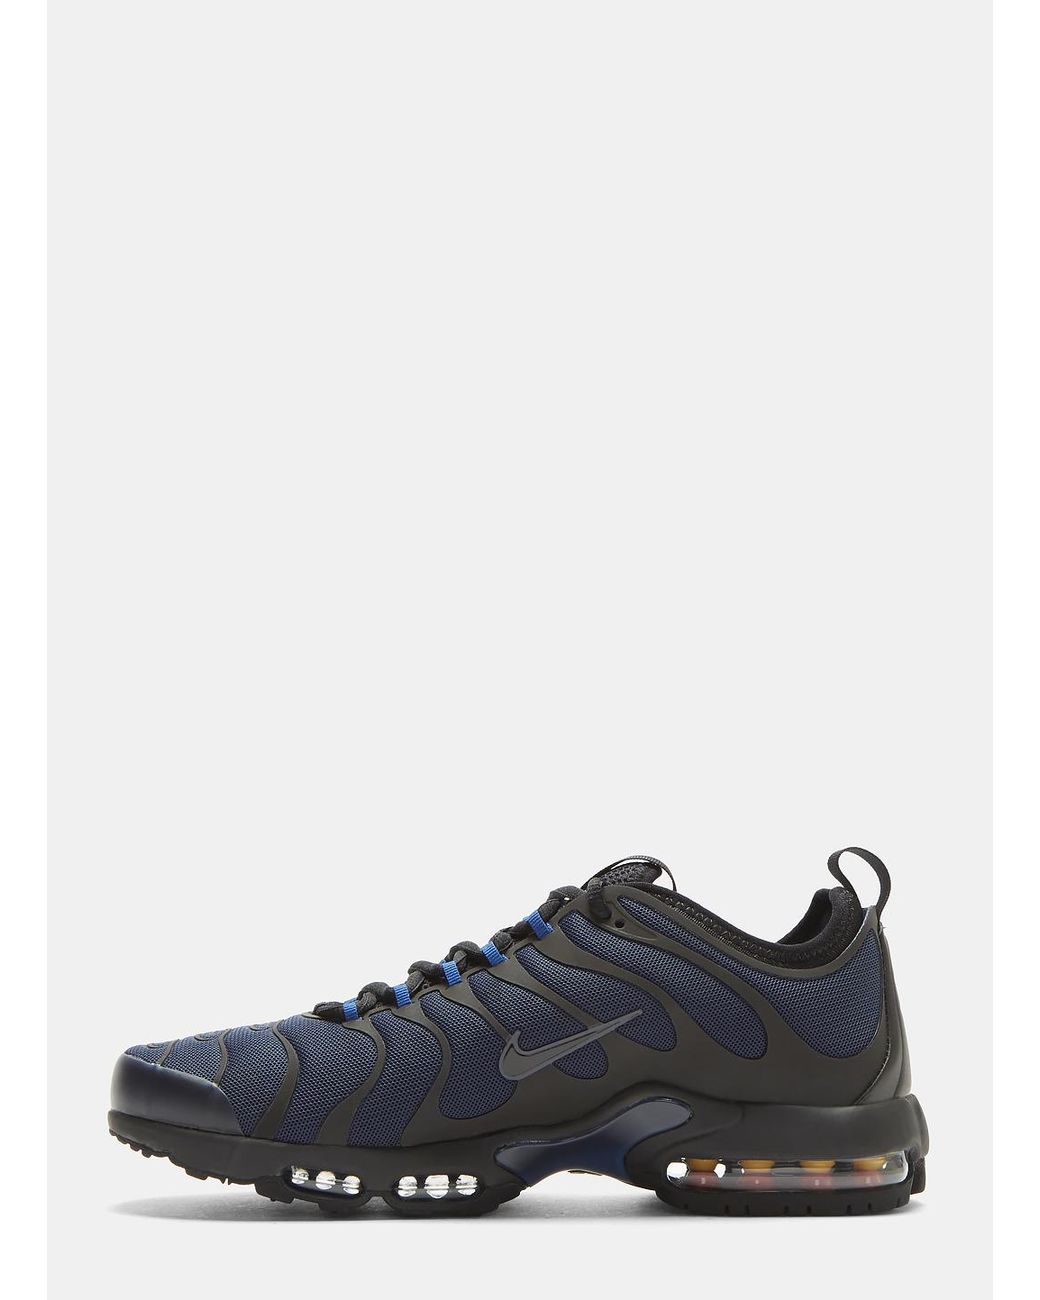 Nike Air Max Plus Tn Ultra Sneakers In Black And Navy for Men | Lyst  Australia